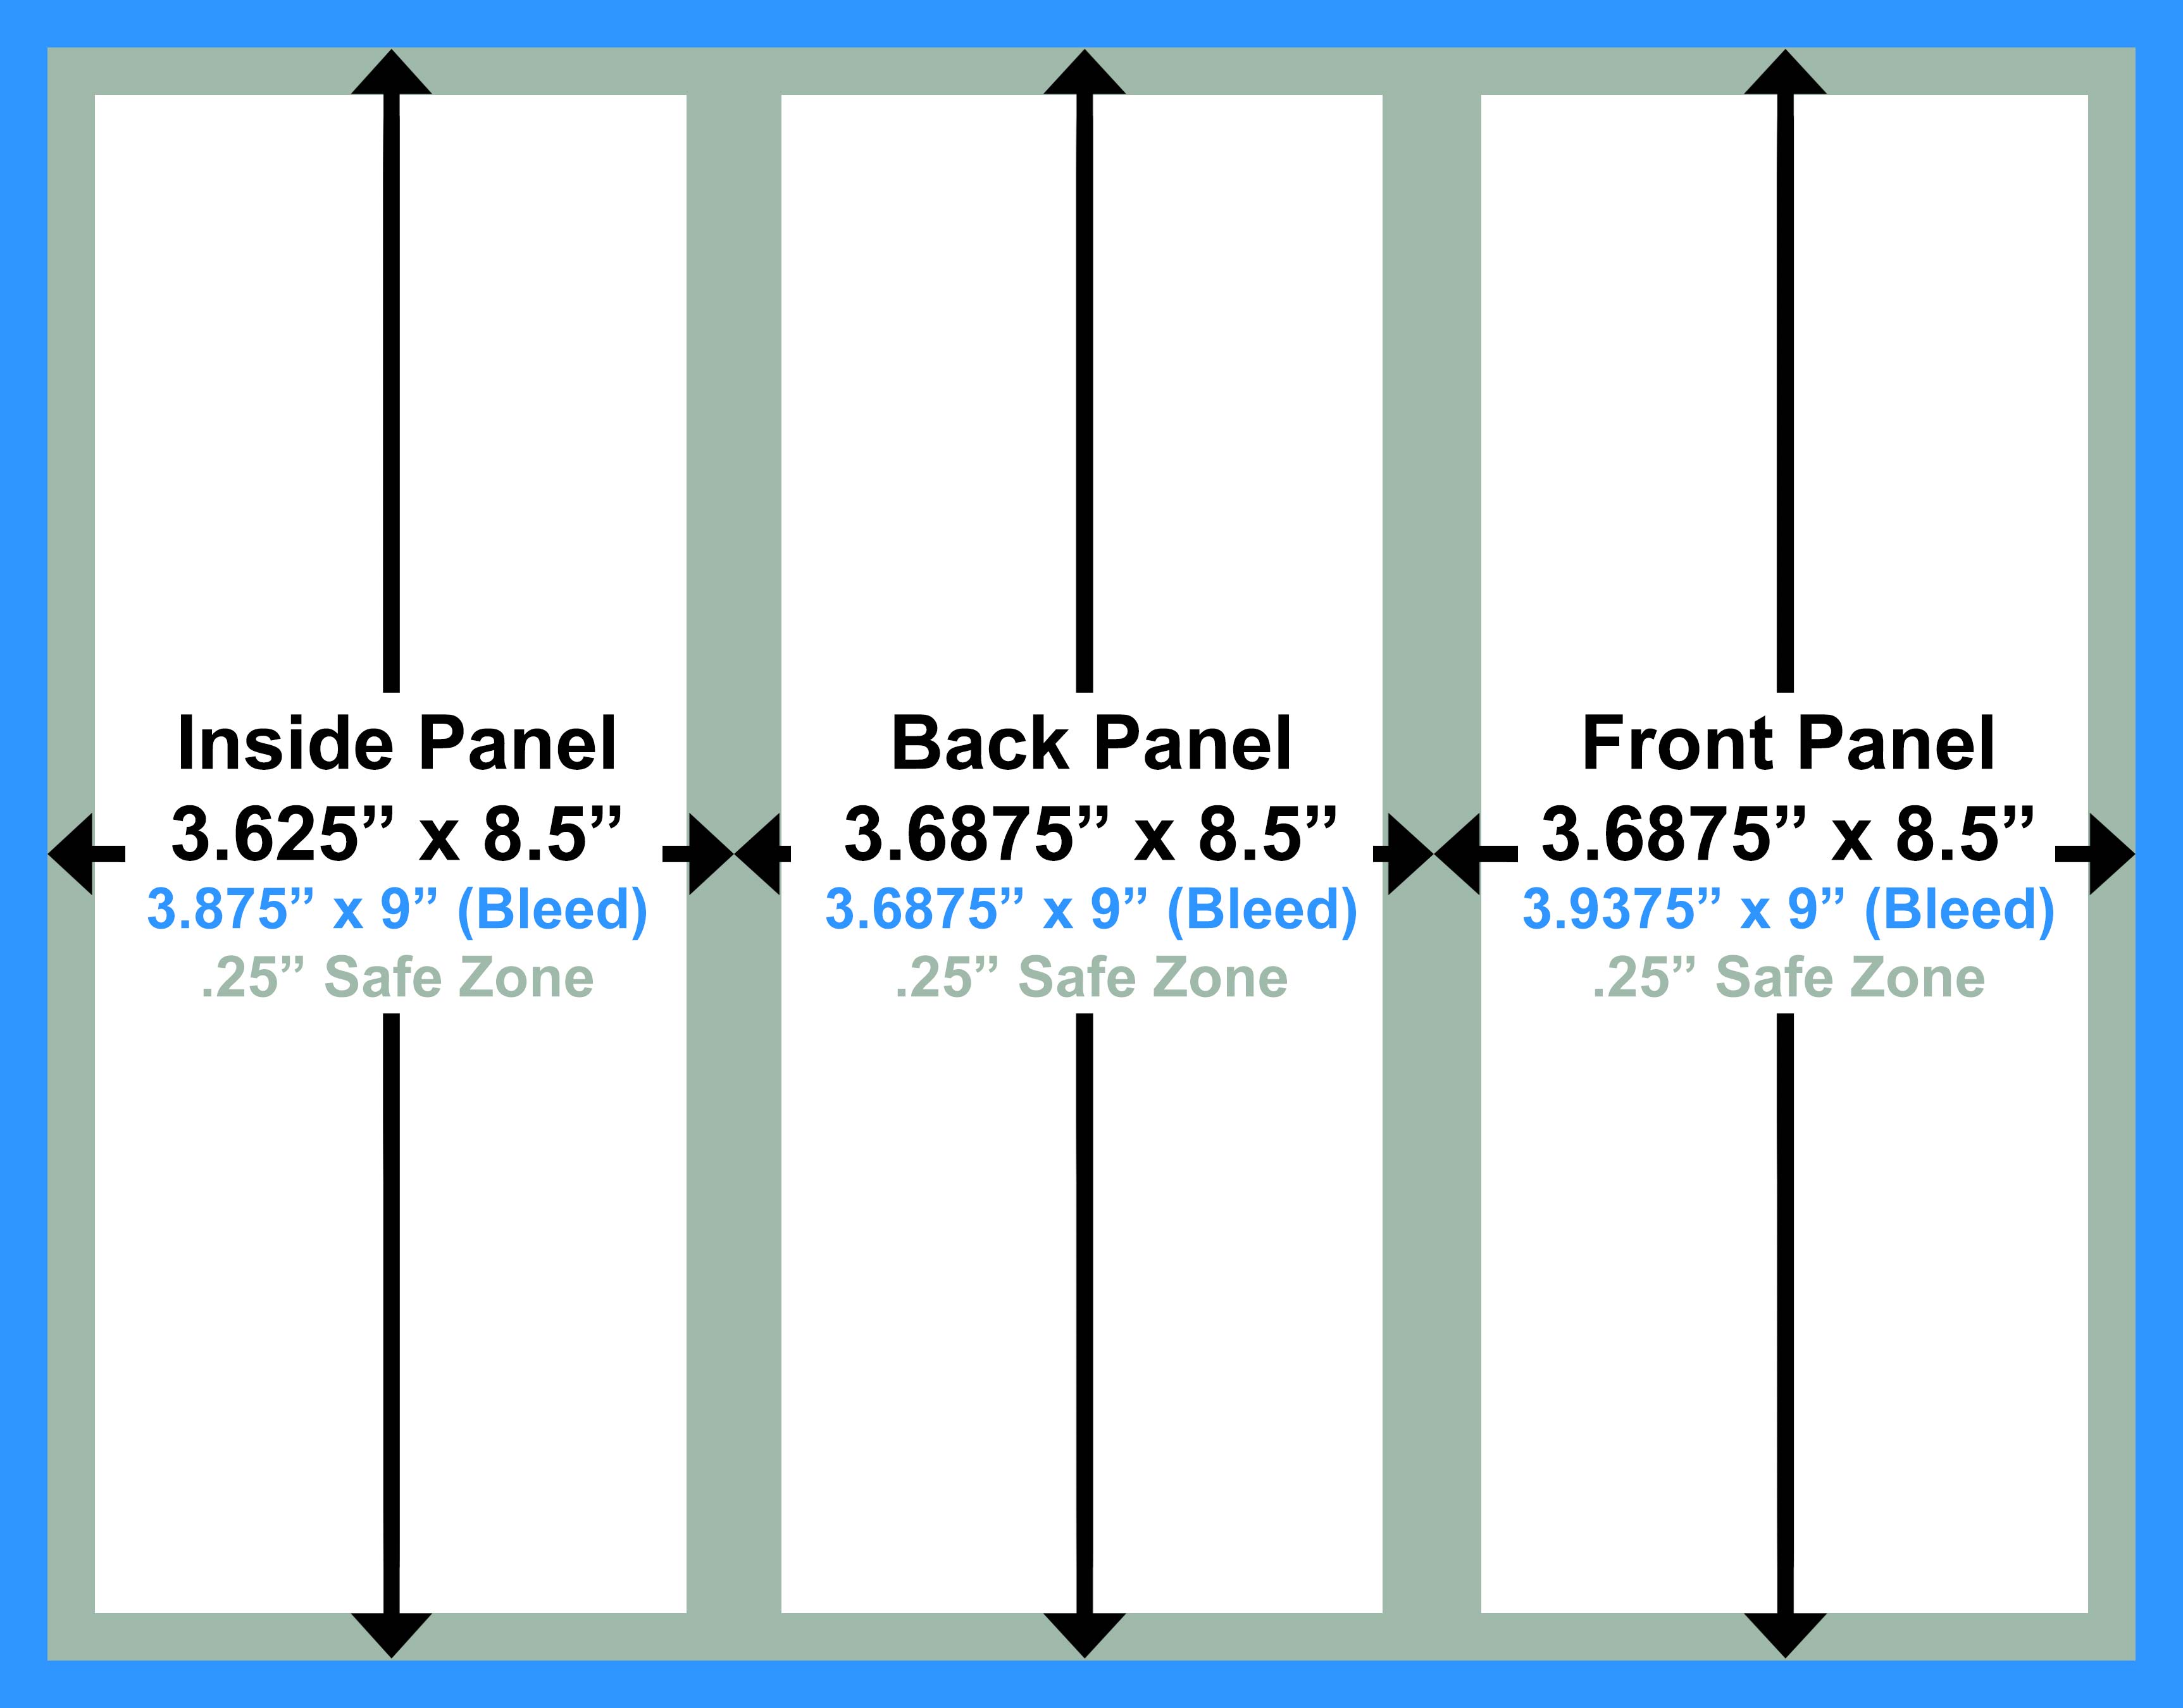 Outside panel dimensions for tri-fold brochure with Bleed printing